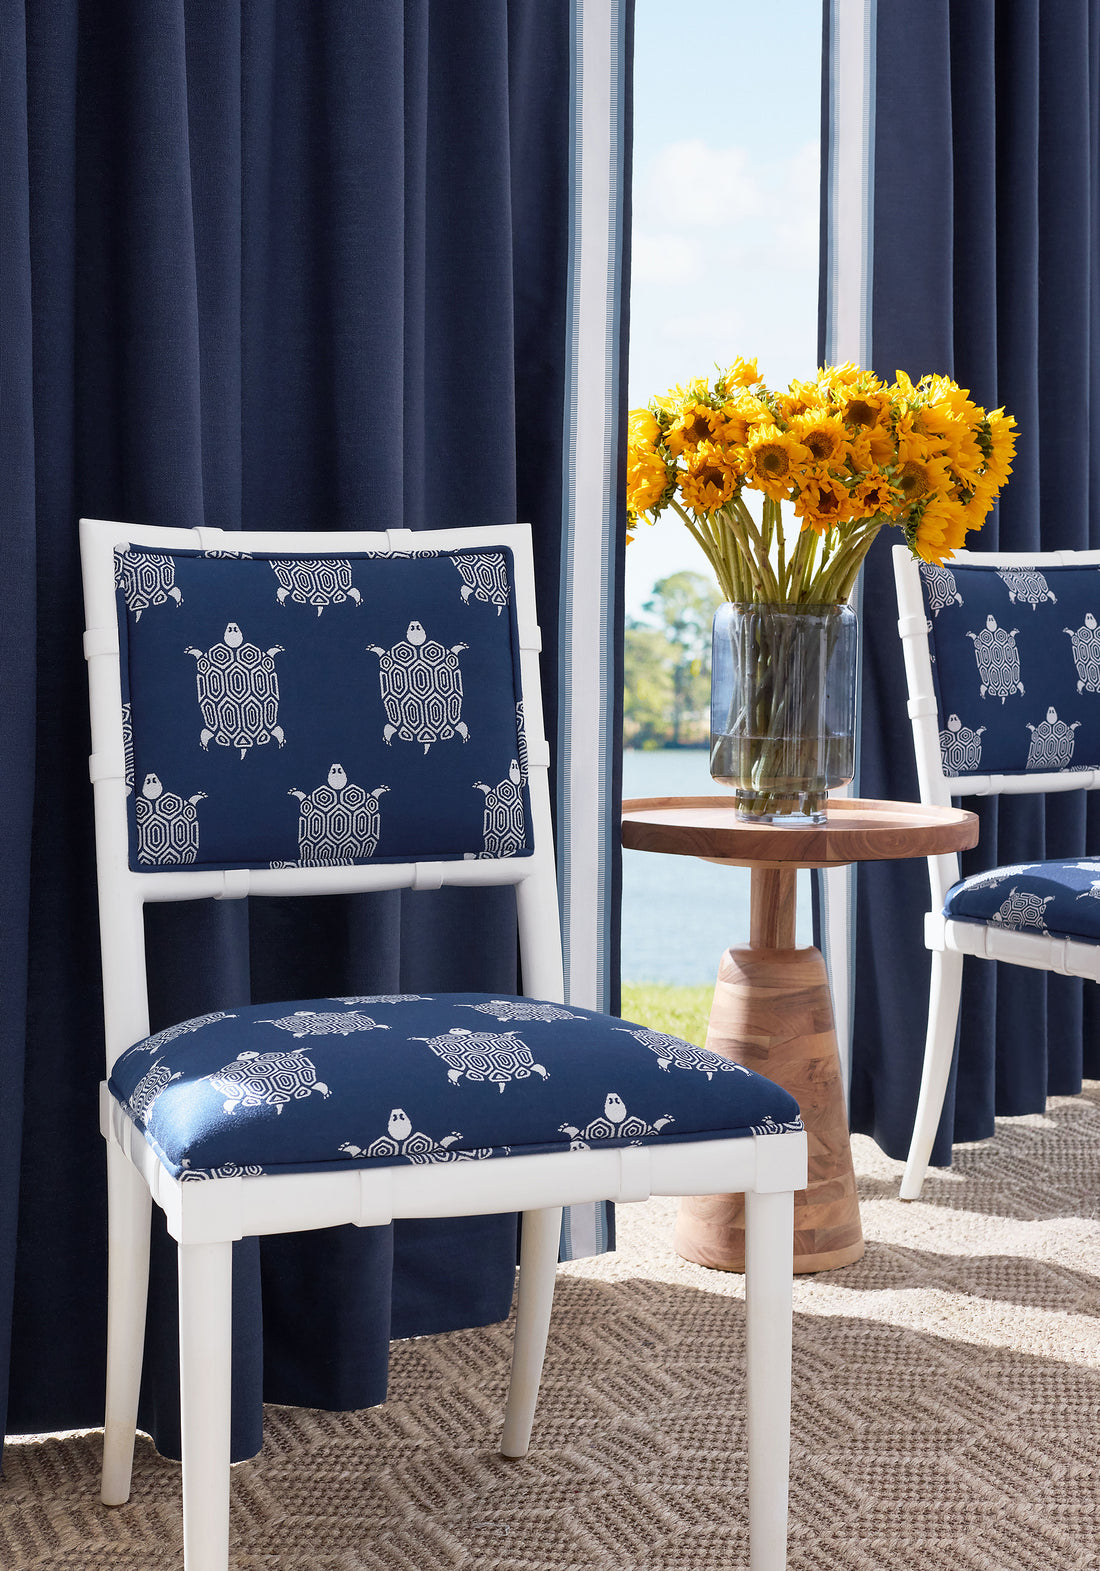 Curtains made from Liam fabric in navy color - pattern number FWW81755 - by Thibaut fabrics